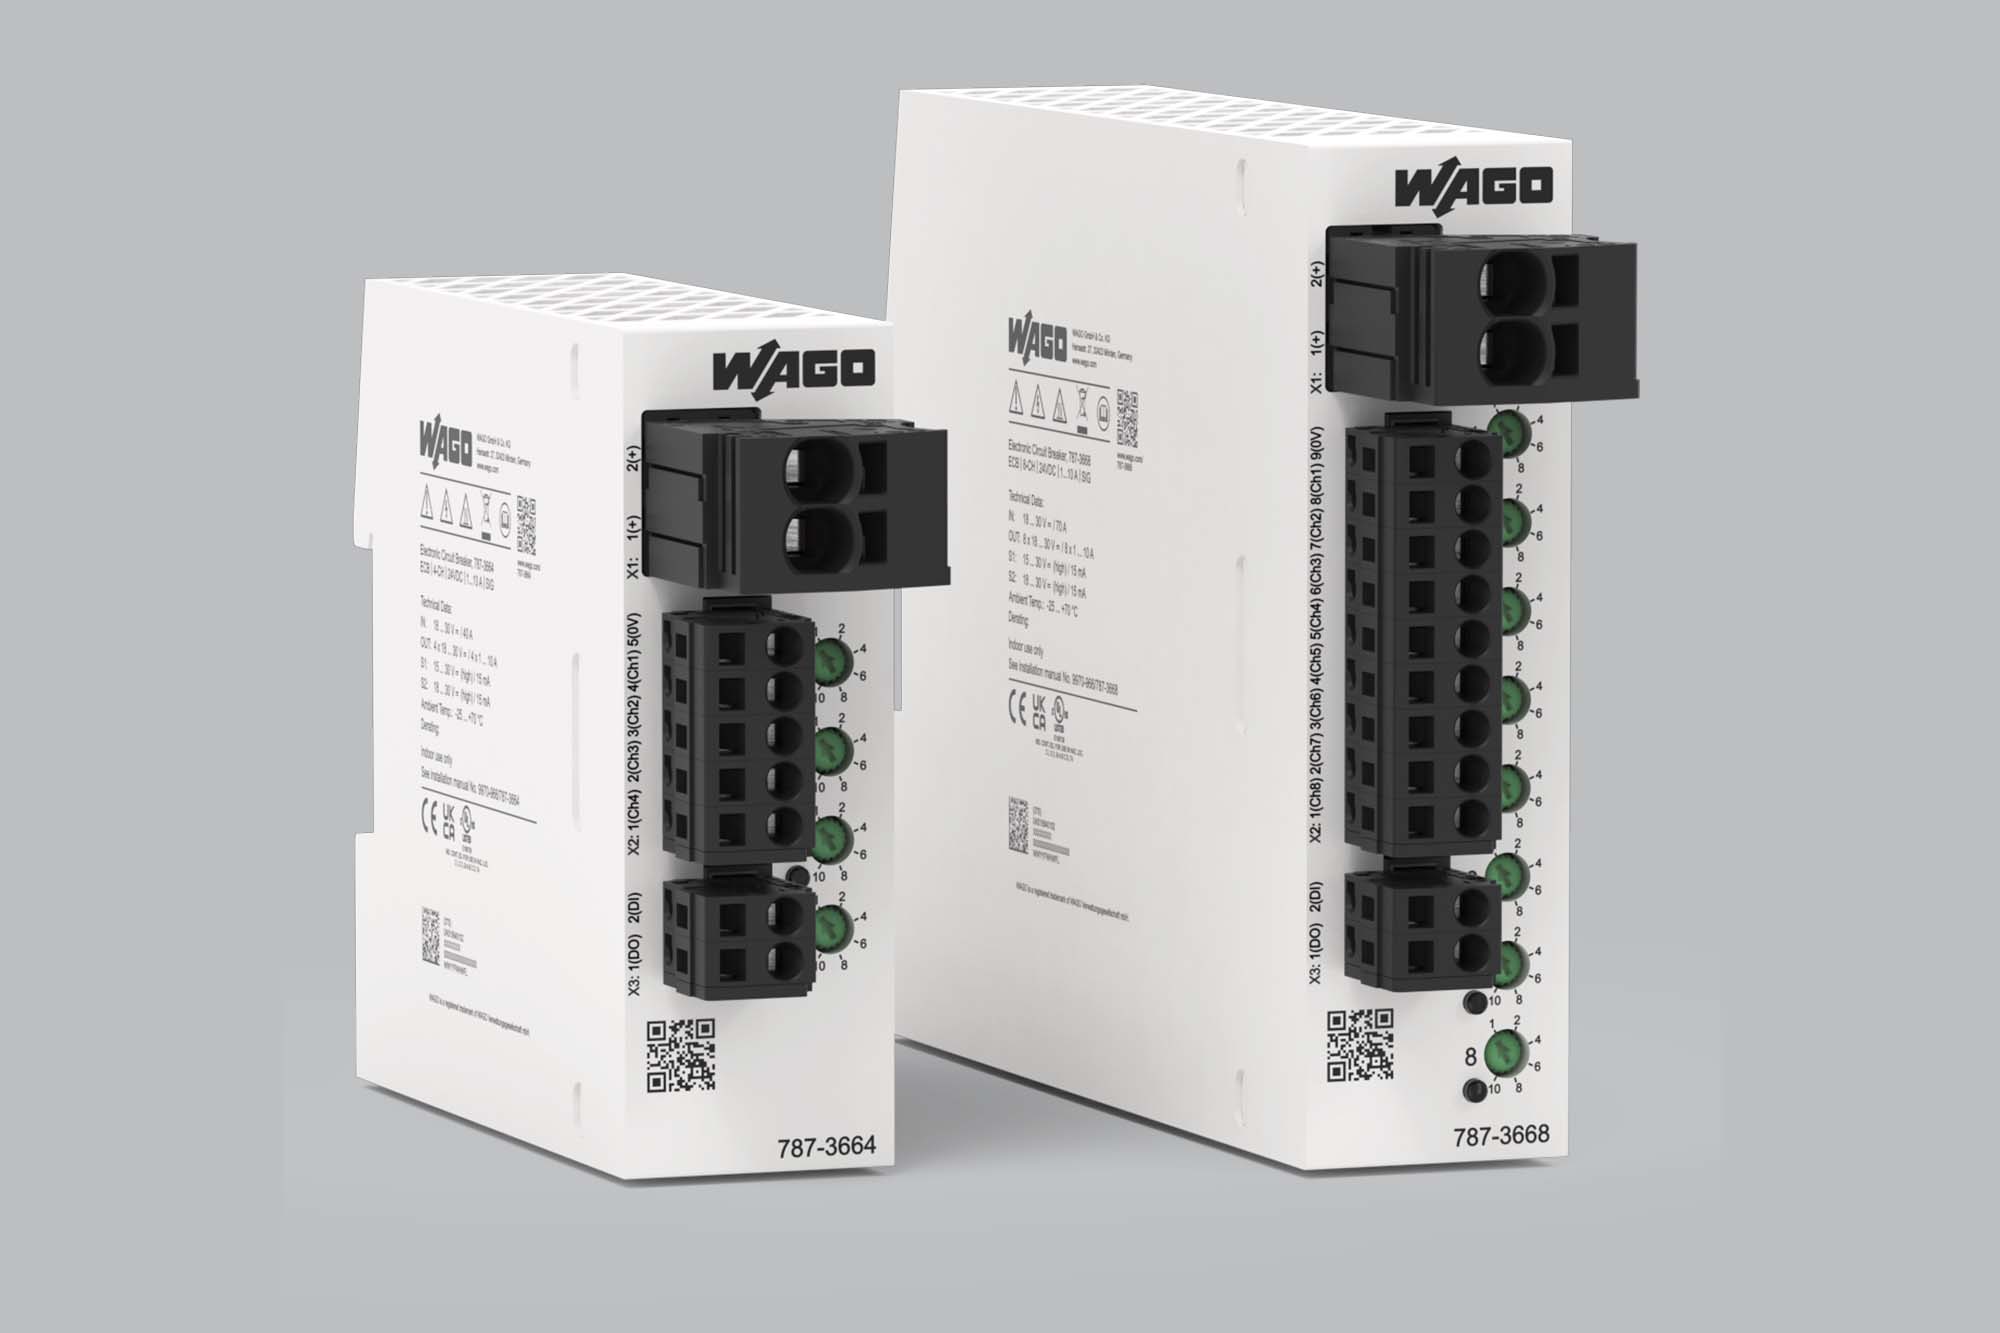 WAGO presents multi-channel electronic circuit breakers